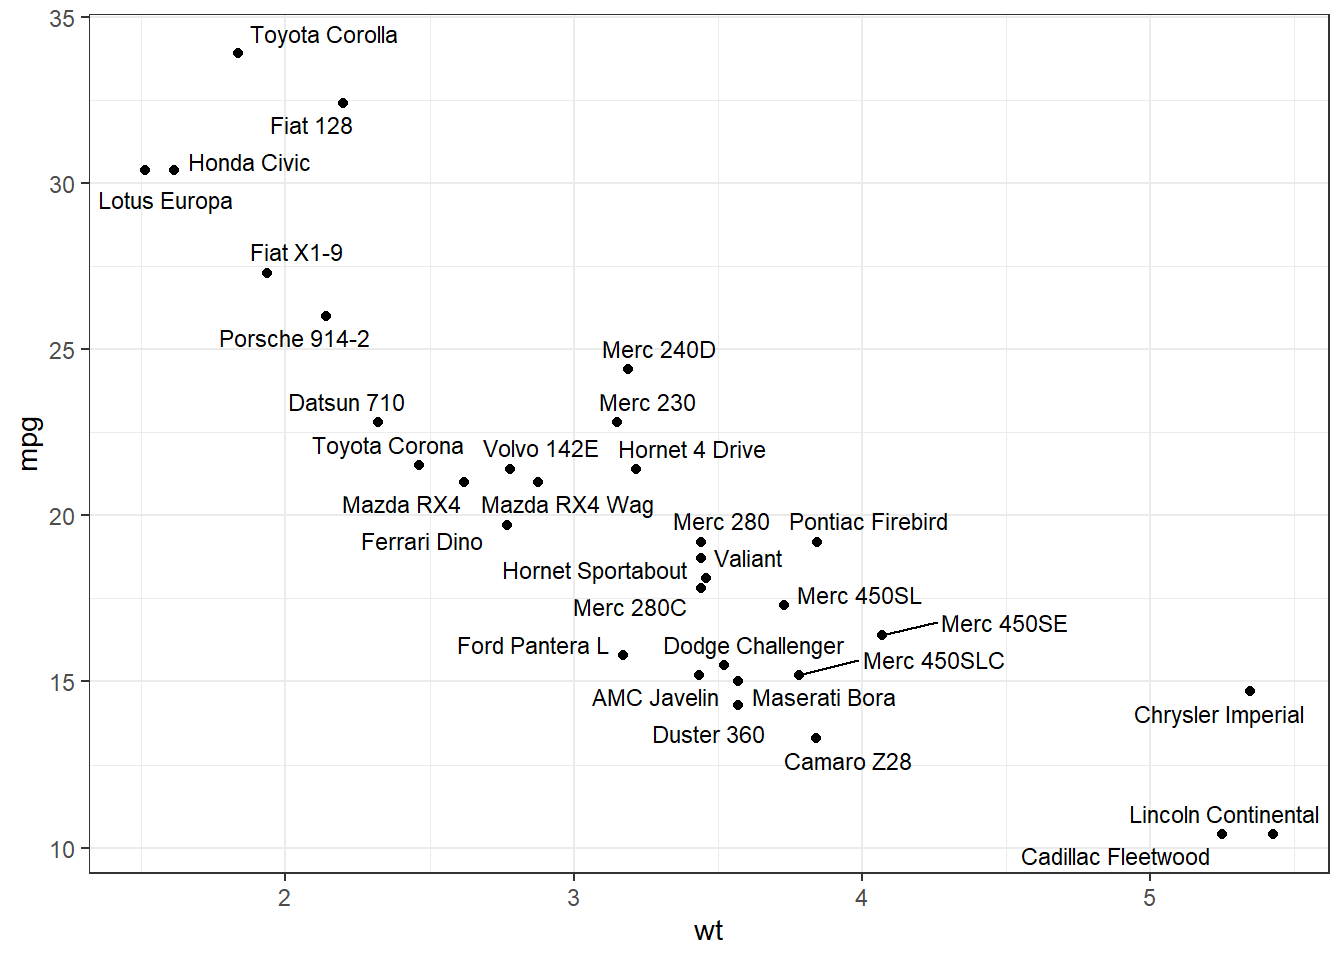 Scatterplot with non-overlapping labels